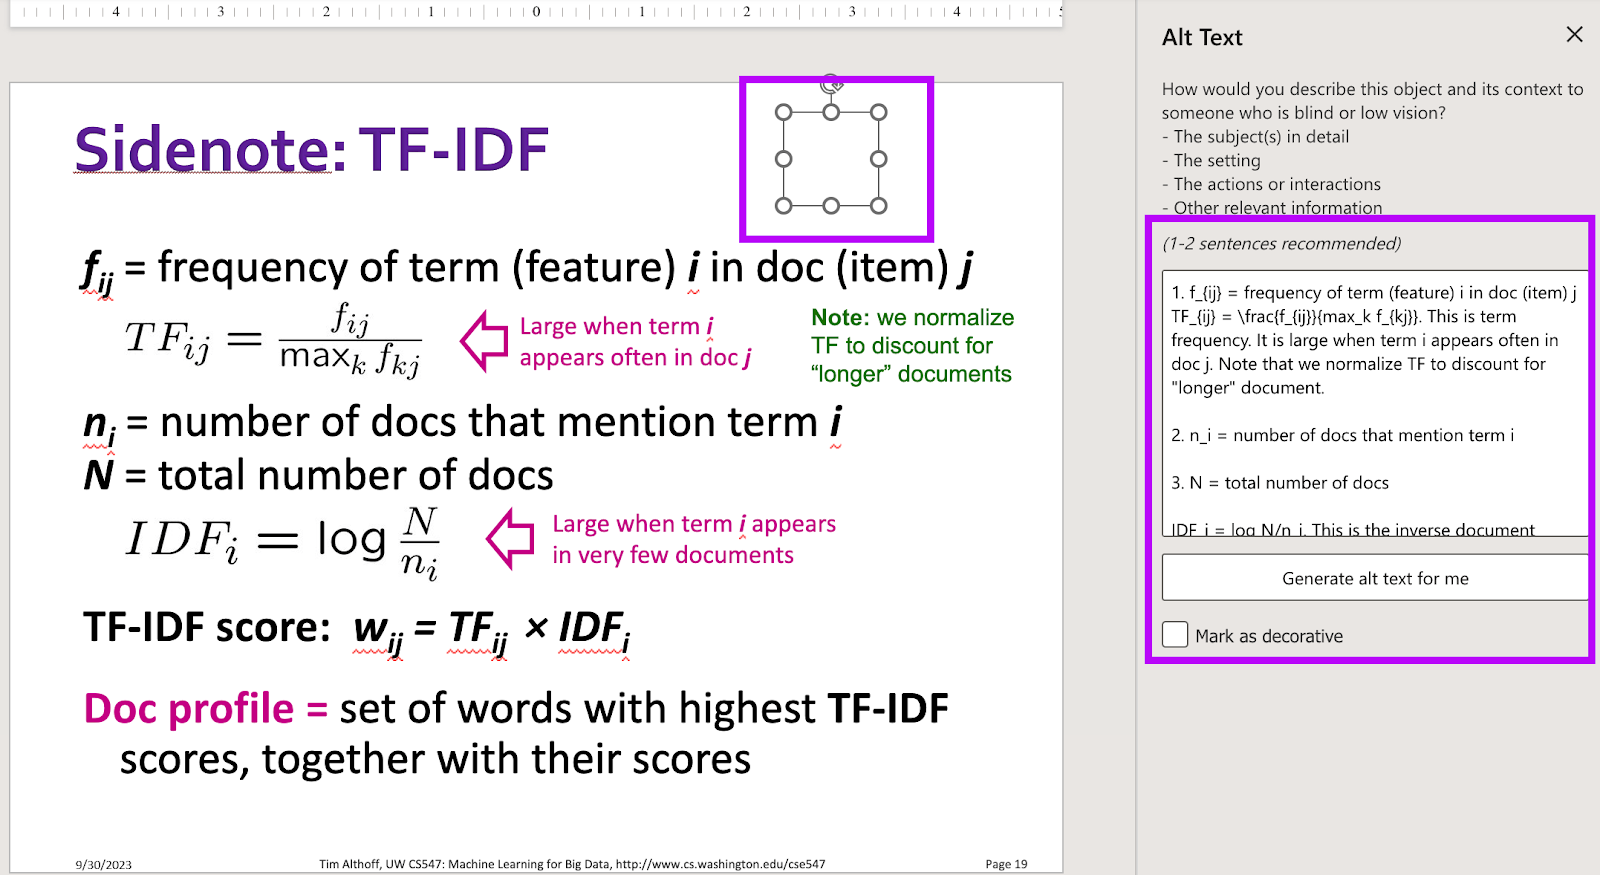 This is the same screenshot of the powerpoint and the alt text panel as above. This time, a white box is highlighted and the alt text for this empty box is the math and text that we marked decorative previously.